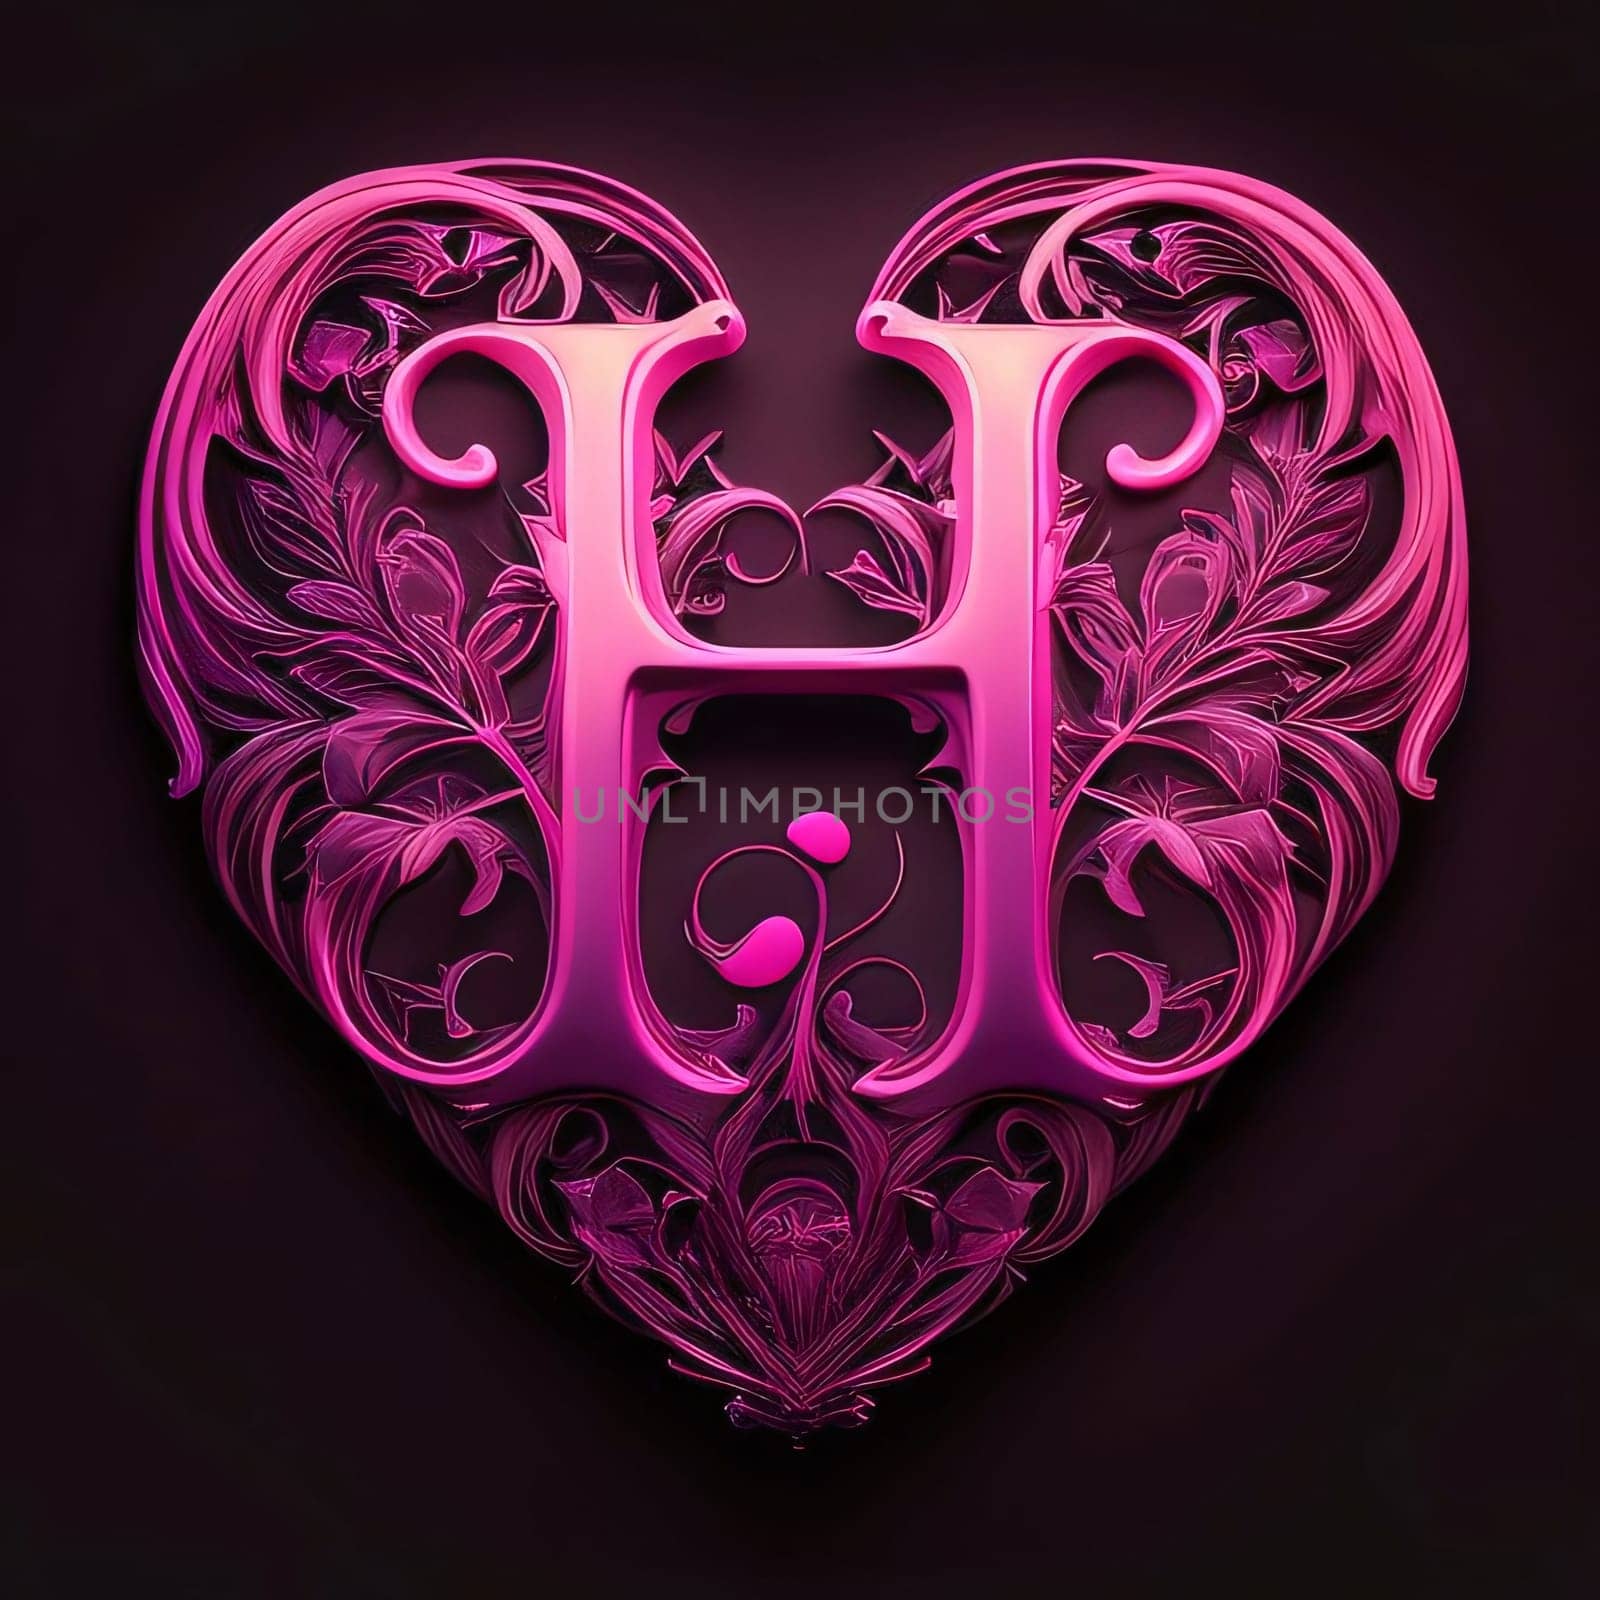 Graphic alphabet letters: Luxury heart with floral ornament on dark background. 3d render